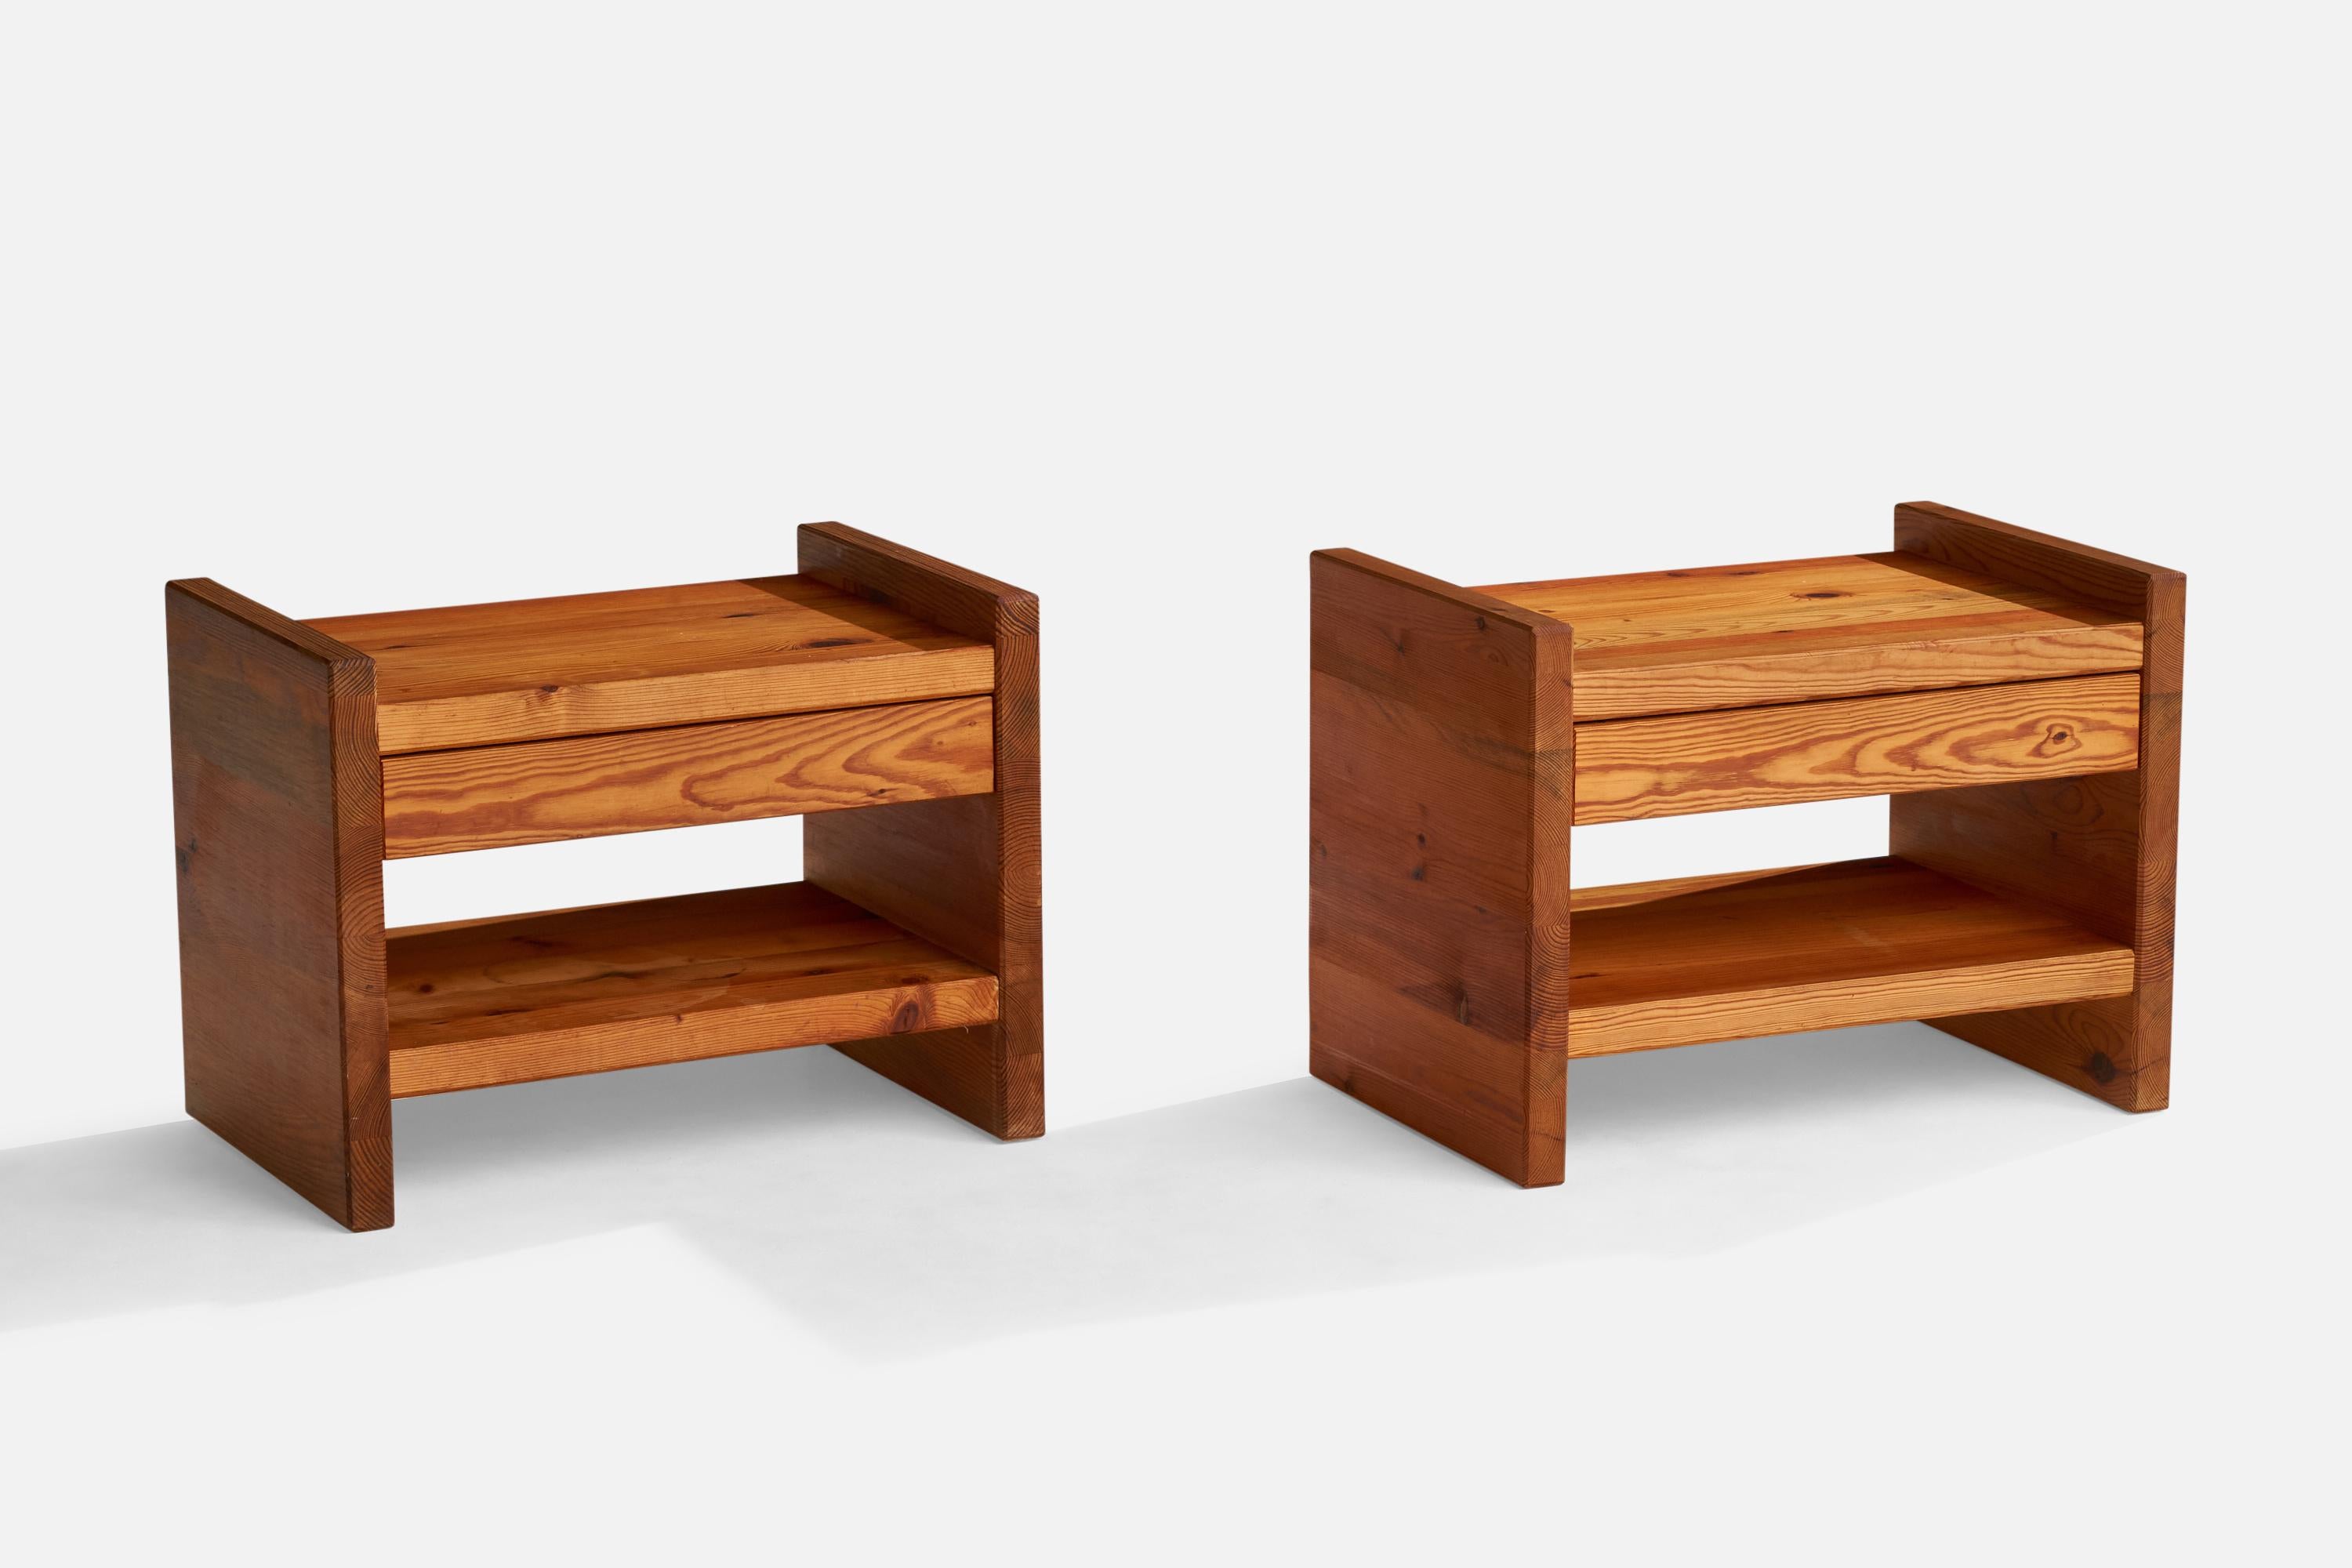 A pair of pine nightstands or bedside cabinets designed and produced in Sweden, 1970s.